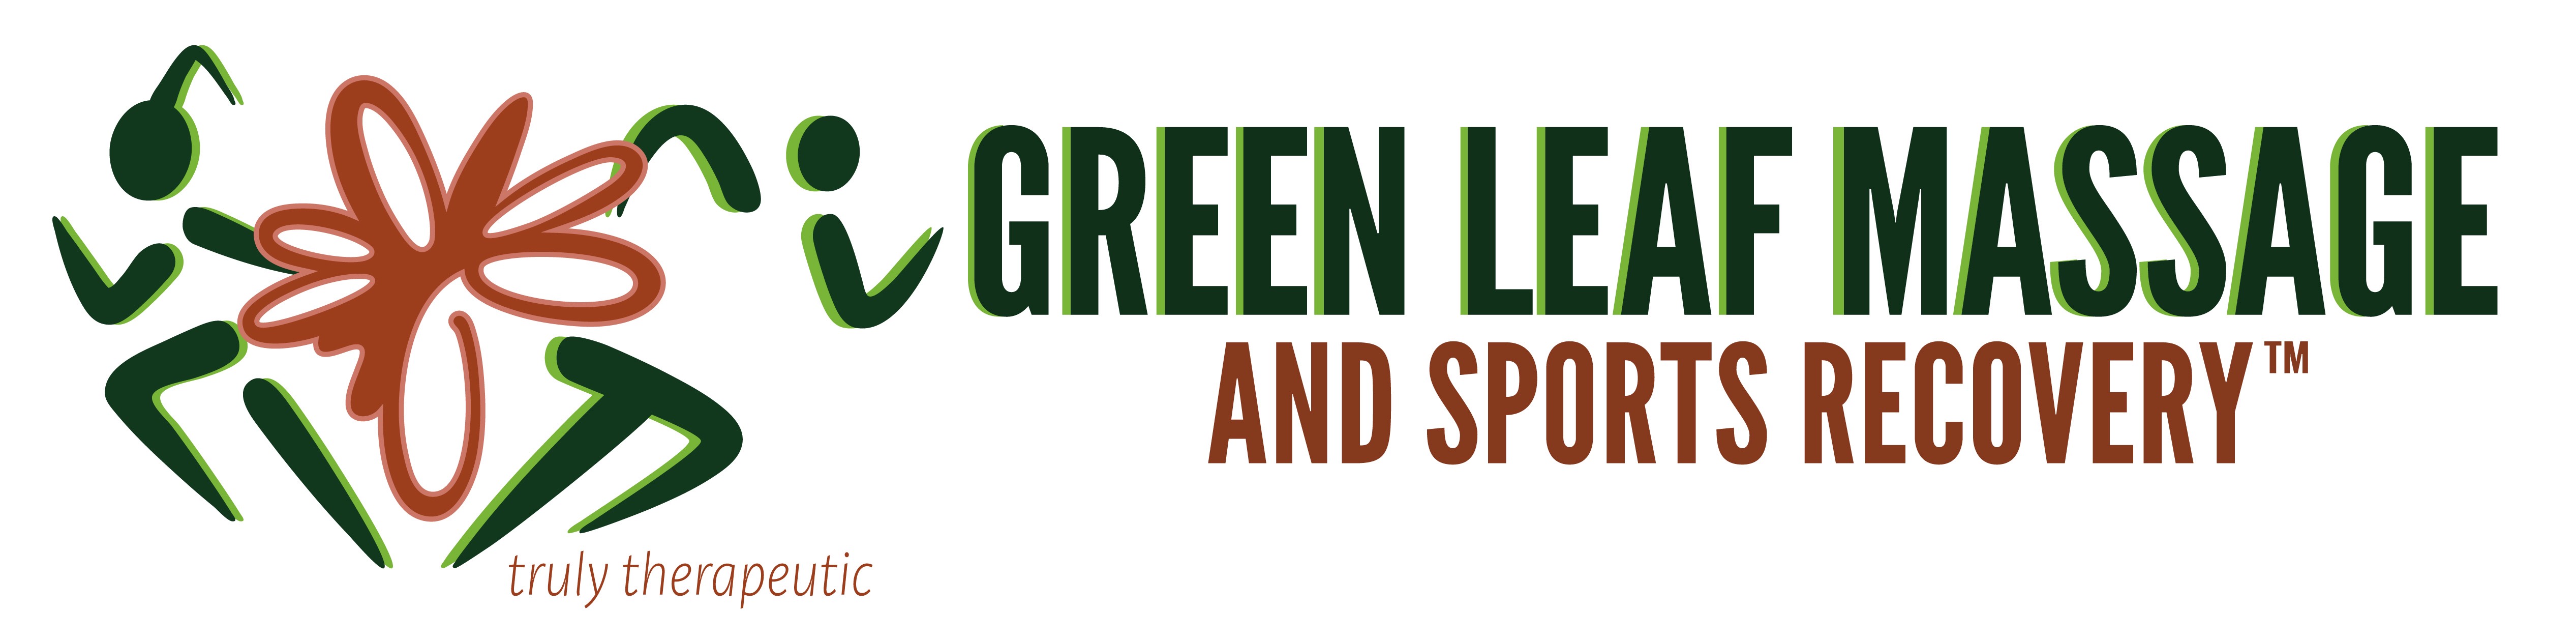 Green Leaf Massage and Sports Recovery Franchise